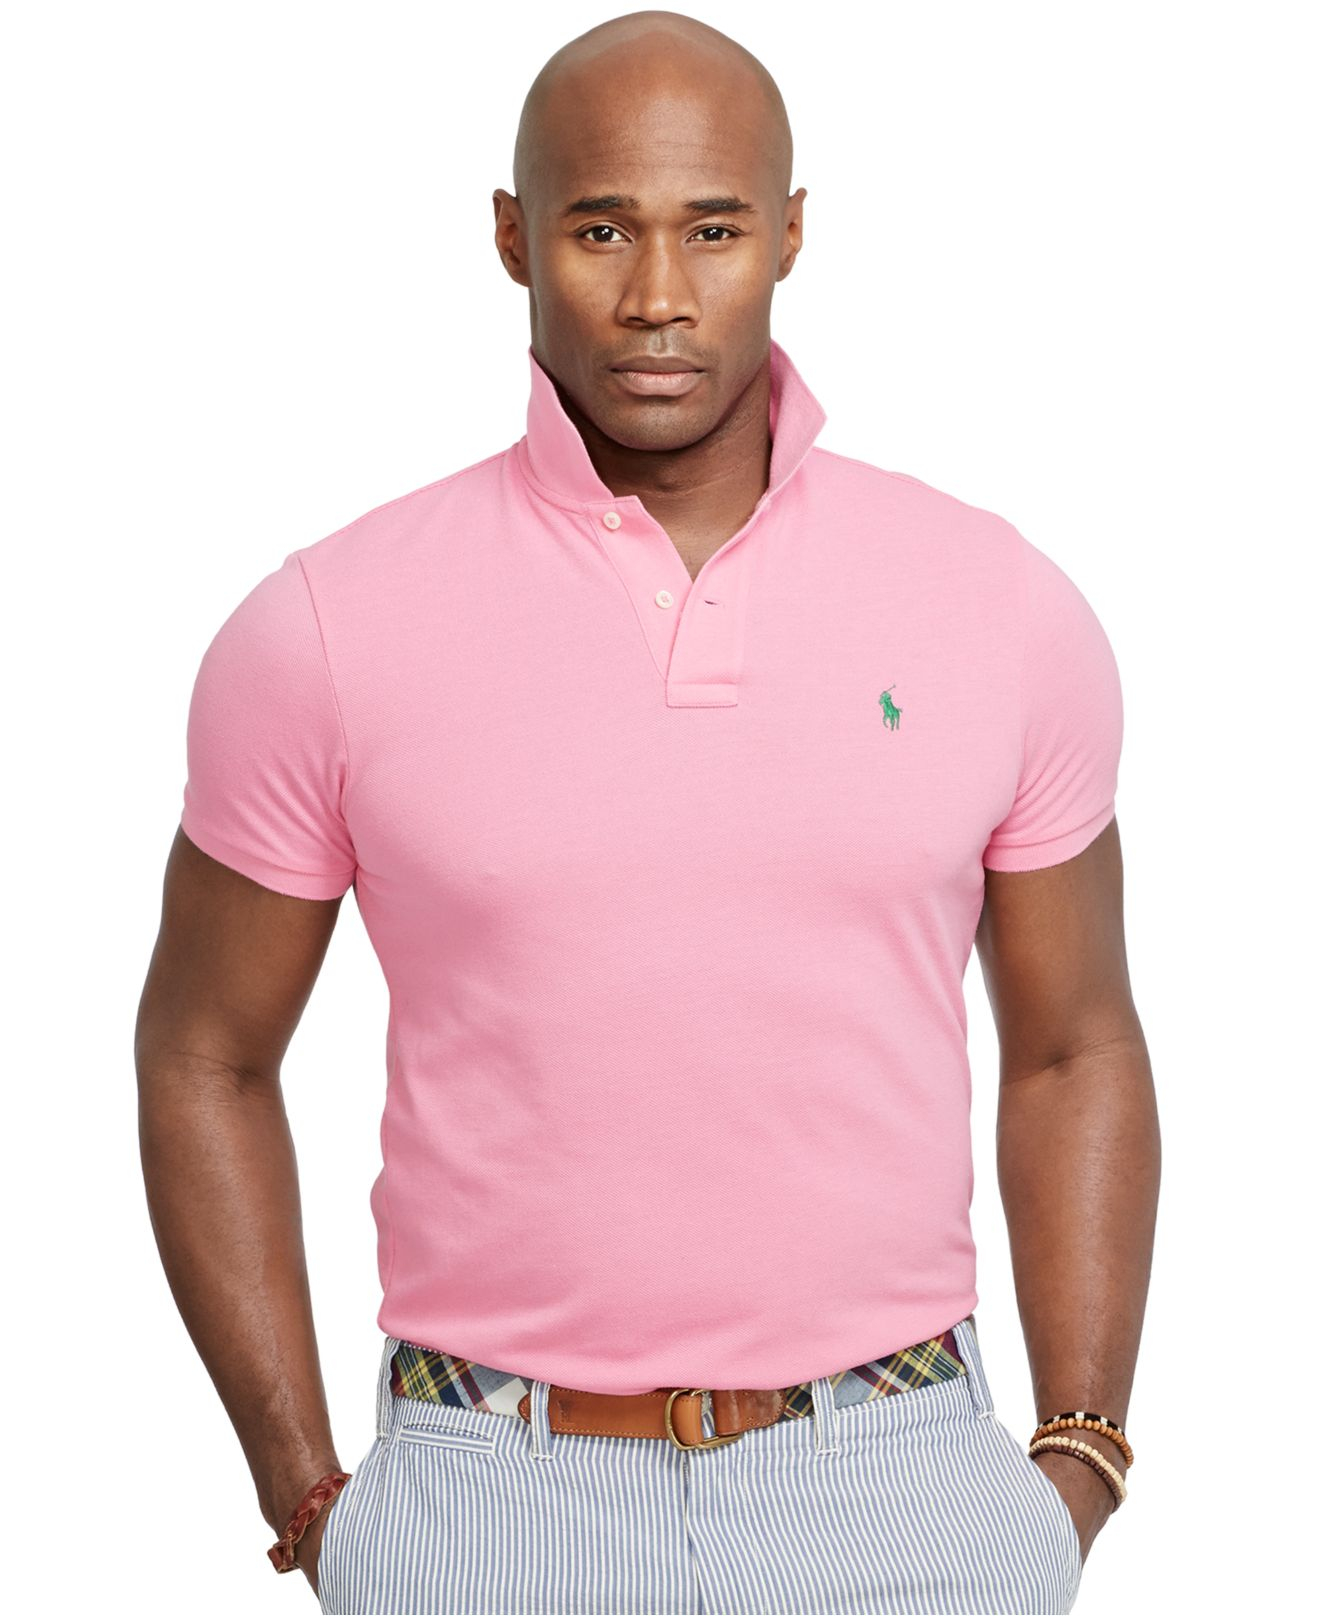 Lyst - Polo Ralph Lauren Big And Tall Solid Mesh Polo in Pink for Men